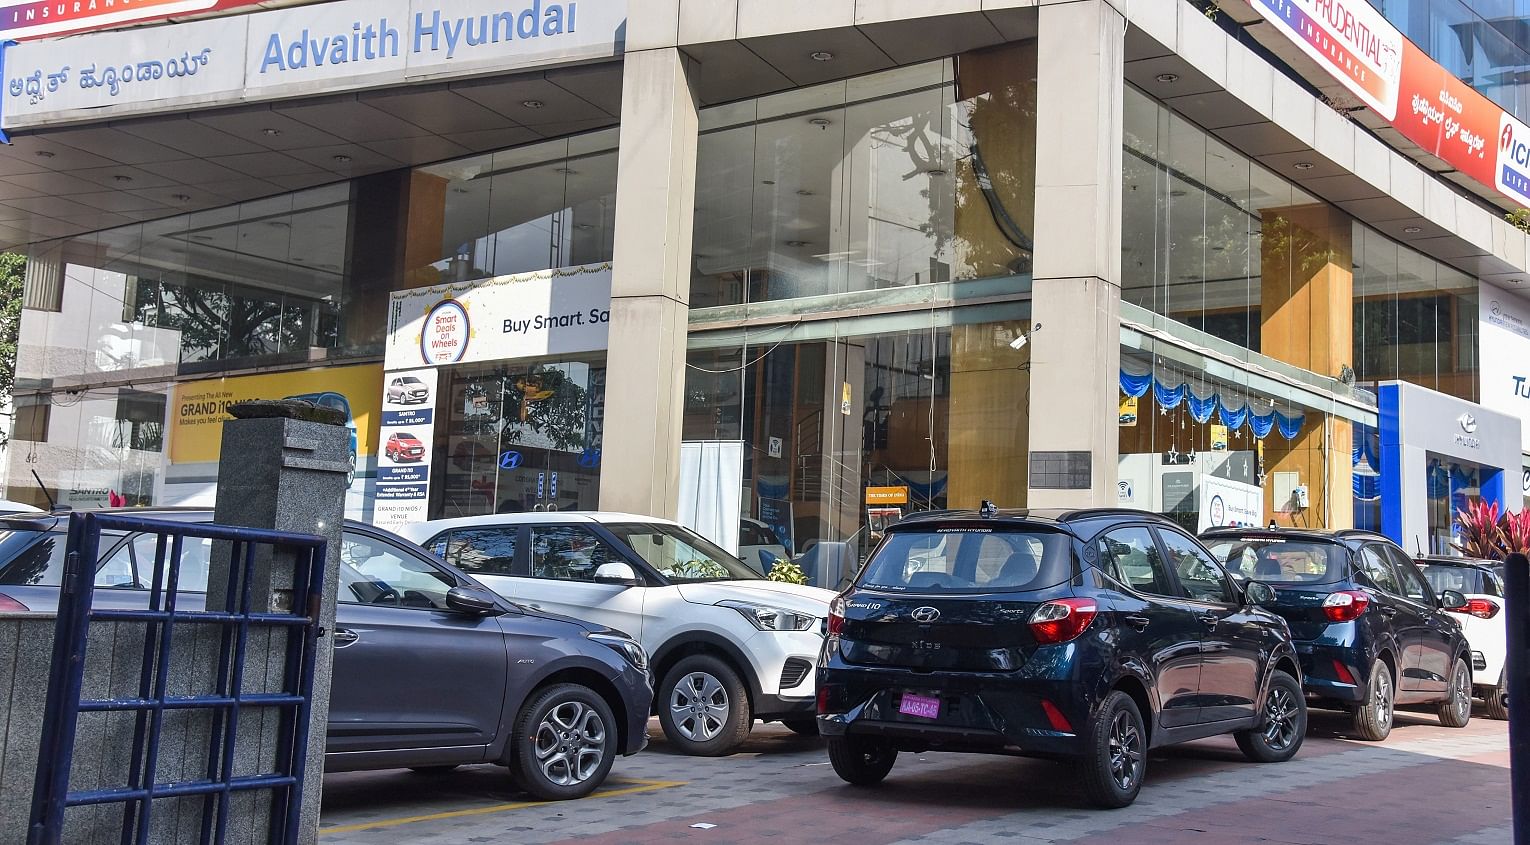 Comparing to last year, representatives of Advaith Hyundai vouch that their sales have increased around 20 percent this festive season.